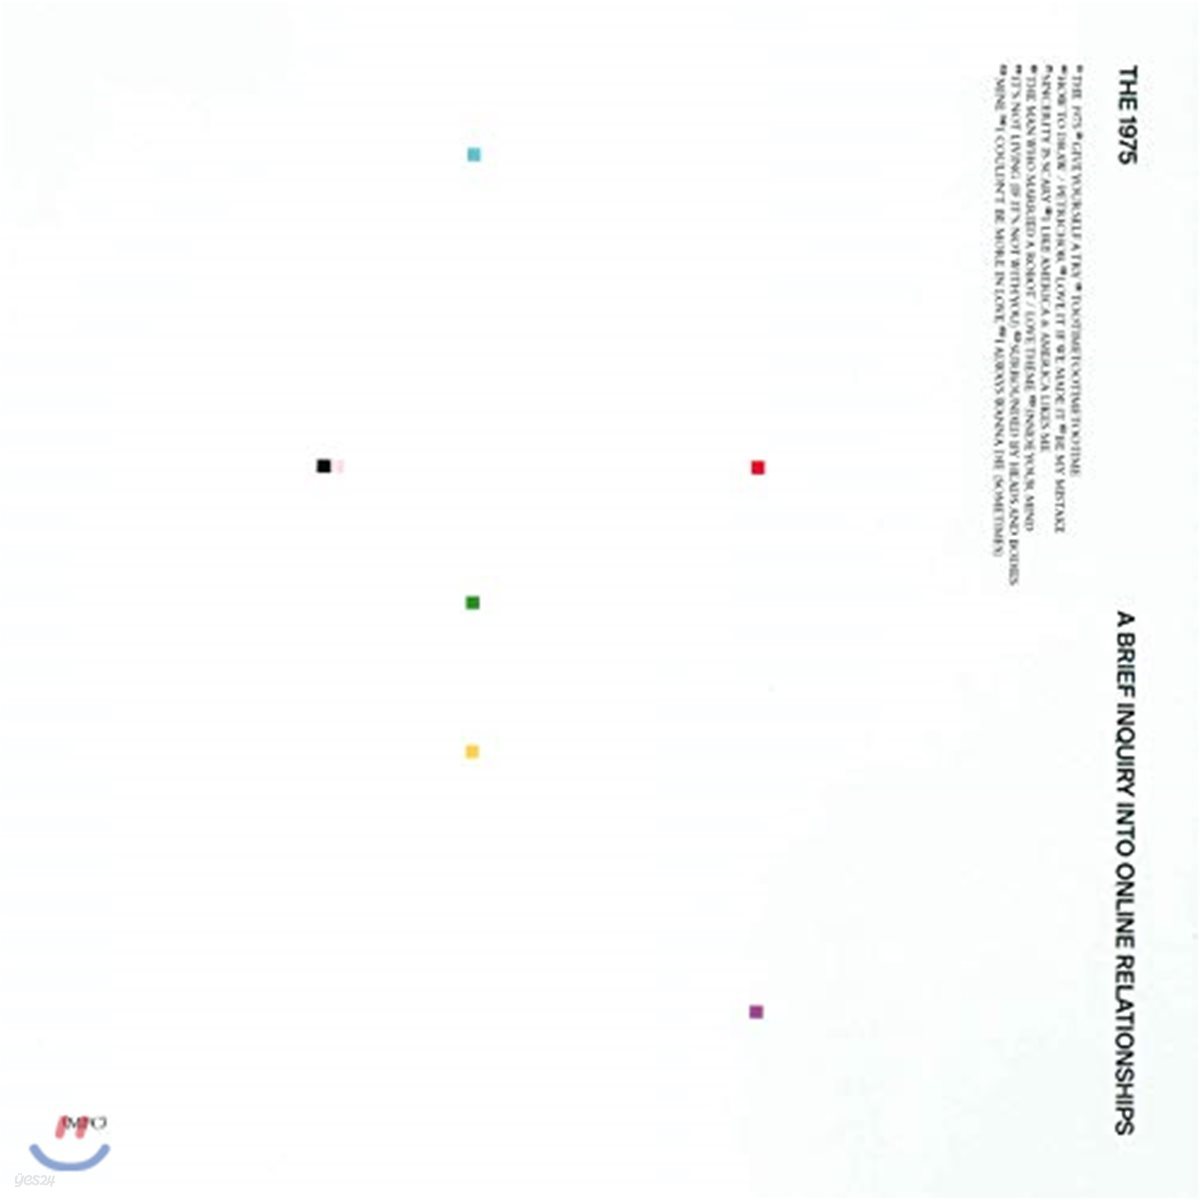 The 1975 - A Brief Inquiry Into Online Relationships 정규 3집